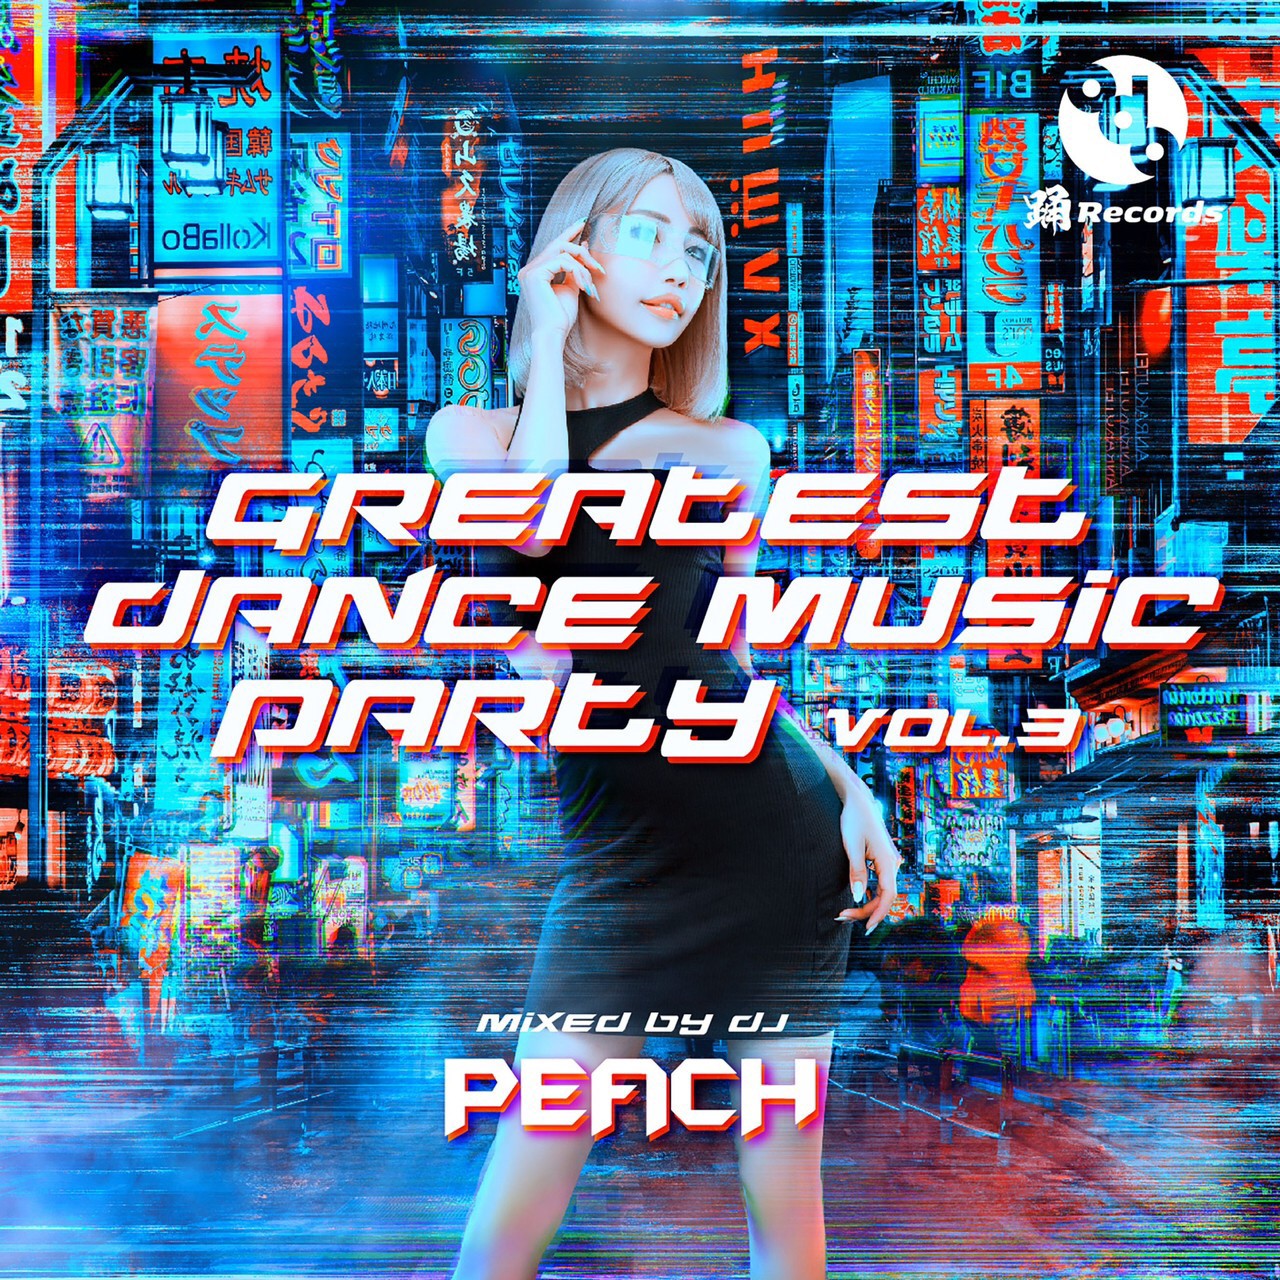 GREATEST DANCE MUSIC PARTY vol.3 (Mixed by DJ PEACH)